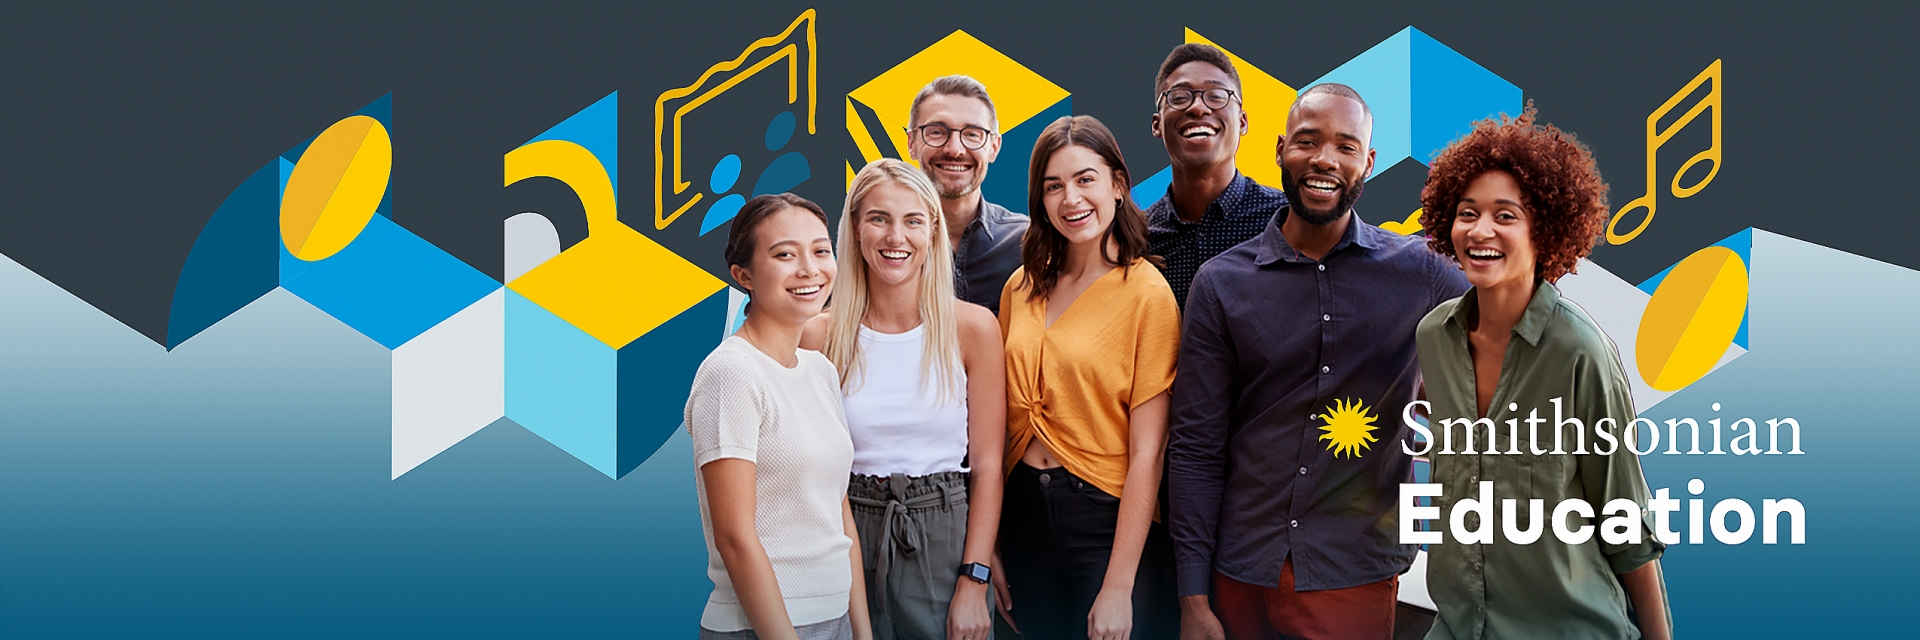 A diverse group of young educators, smiling. Behind is a graphic of blue and yellow isometric squares and museum icons.